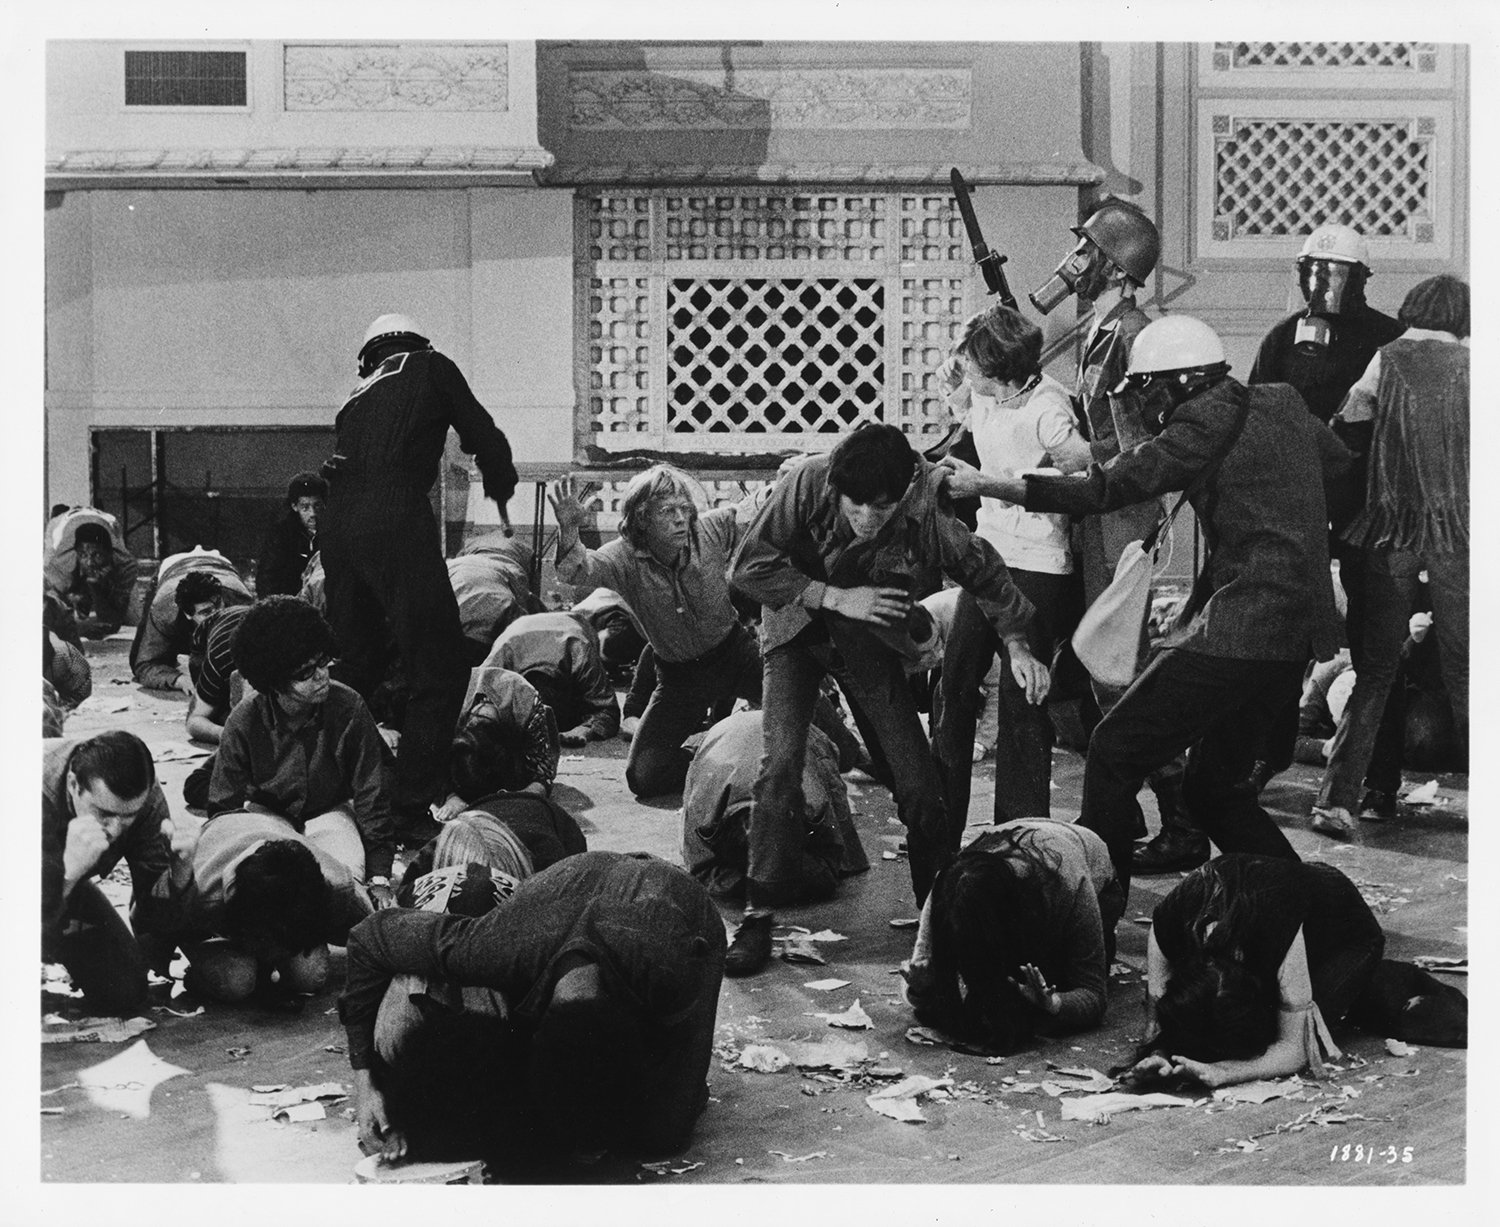 A group of students clash with police in a black and white film still from 1968. An officer in riot gear has his hand around one young woman's waist; others shield their heads with their hands while sheltering against the ground. A man at the middle of the frame has his hands raised up as he kneels.